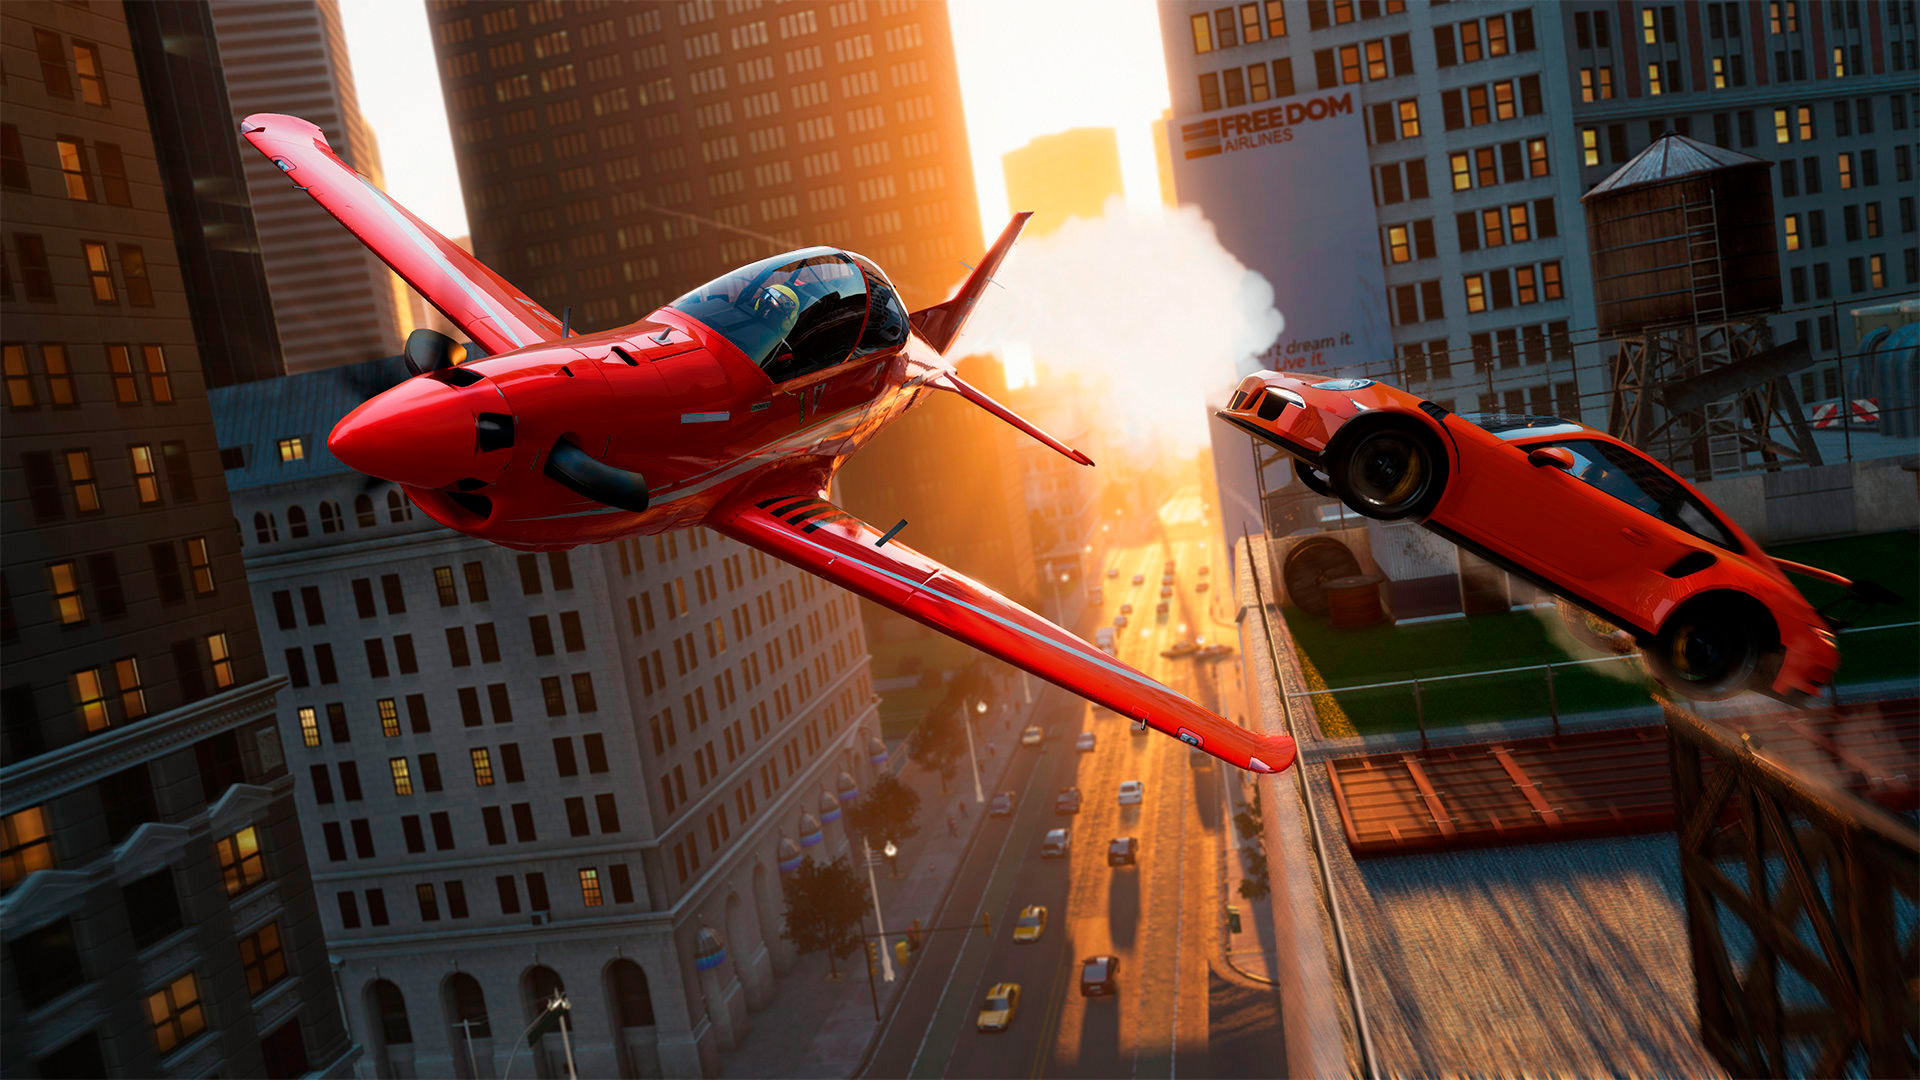 the crew 2 deluxe edition